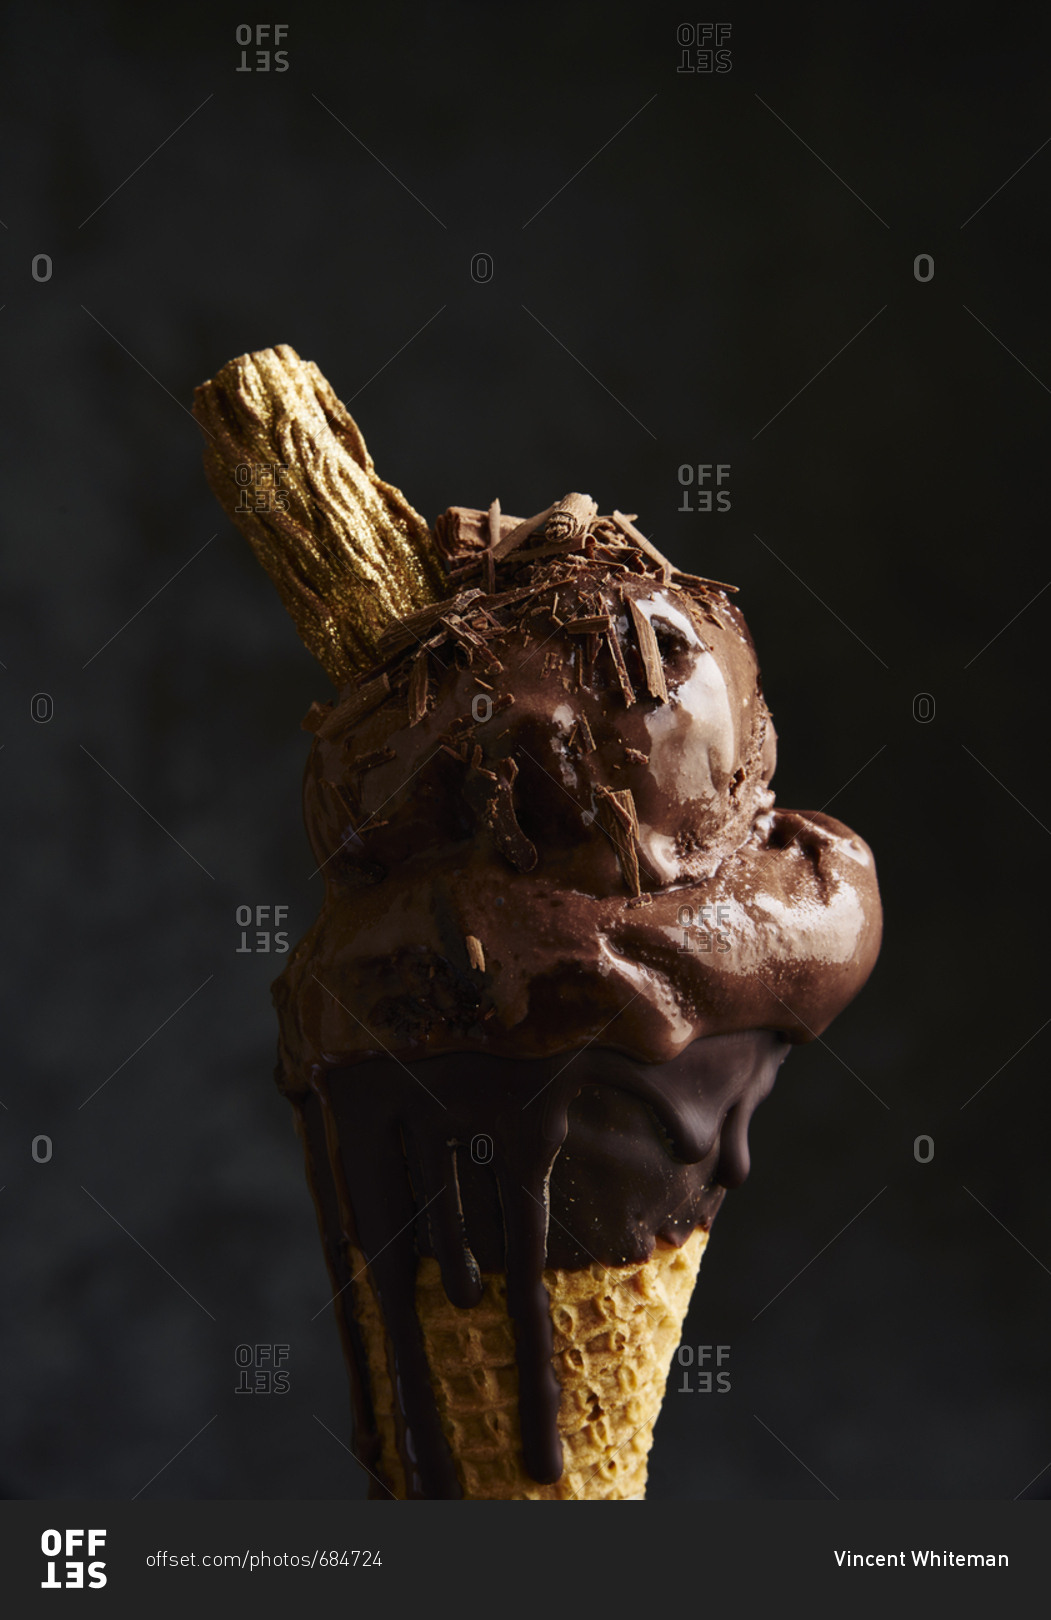 Decadent scoops of chocolate ice cream in cone with flakes of chocolate sprinkled on top